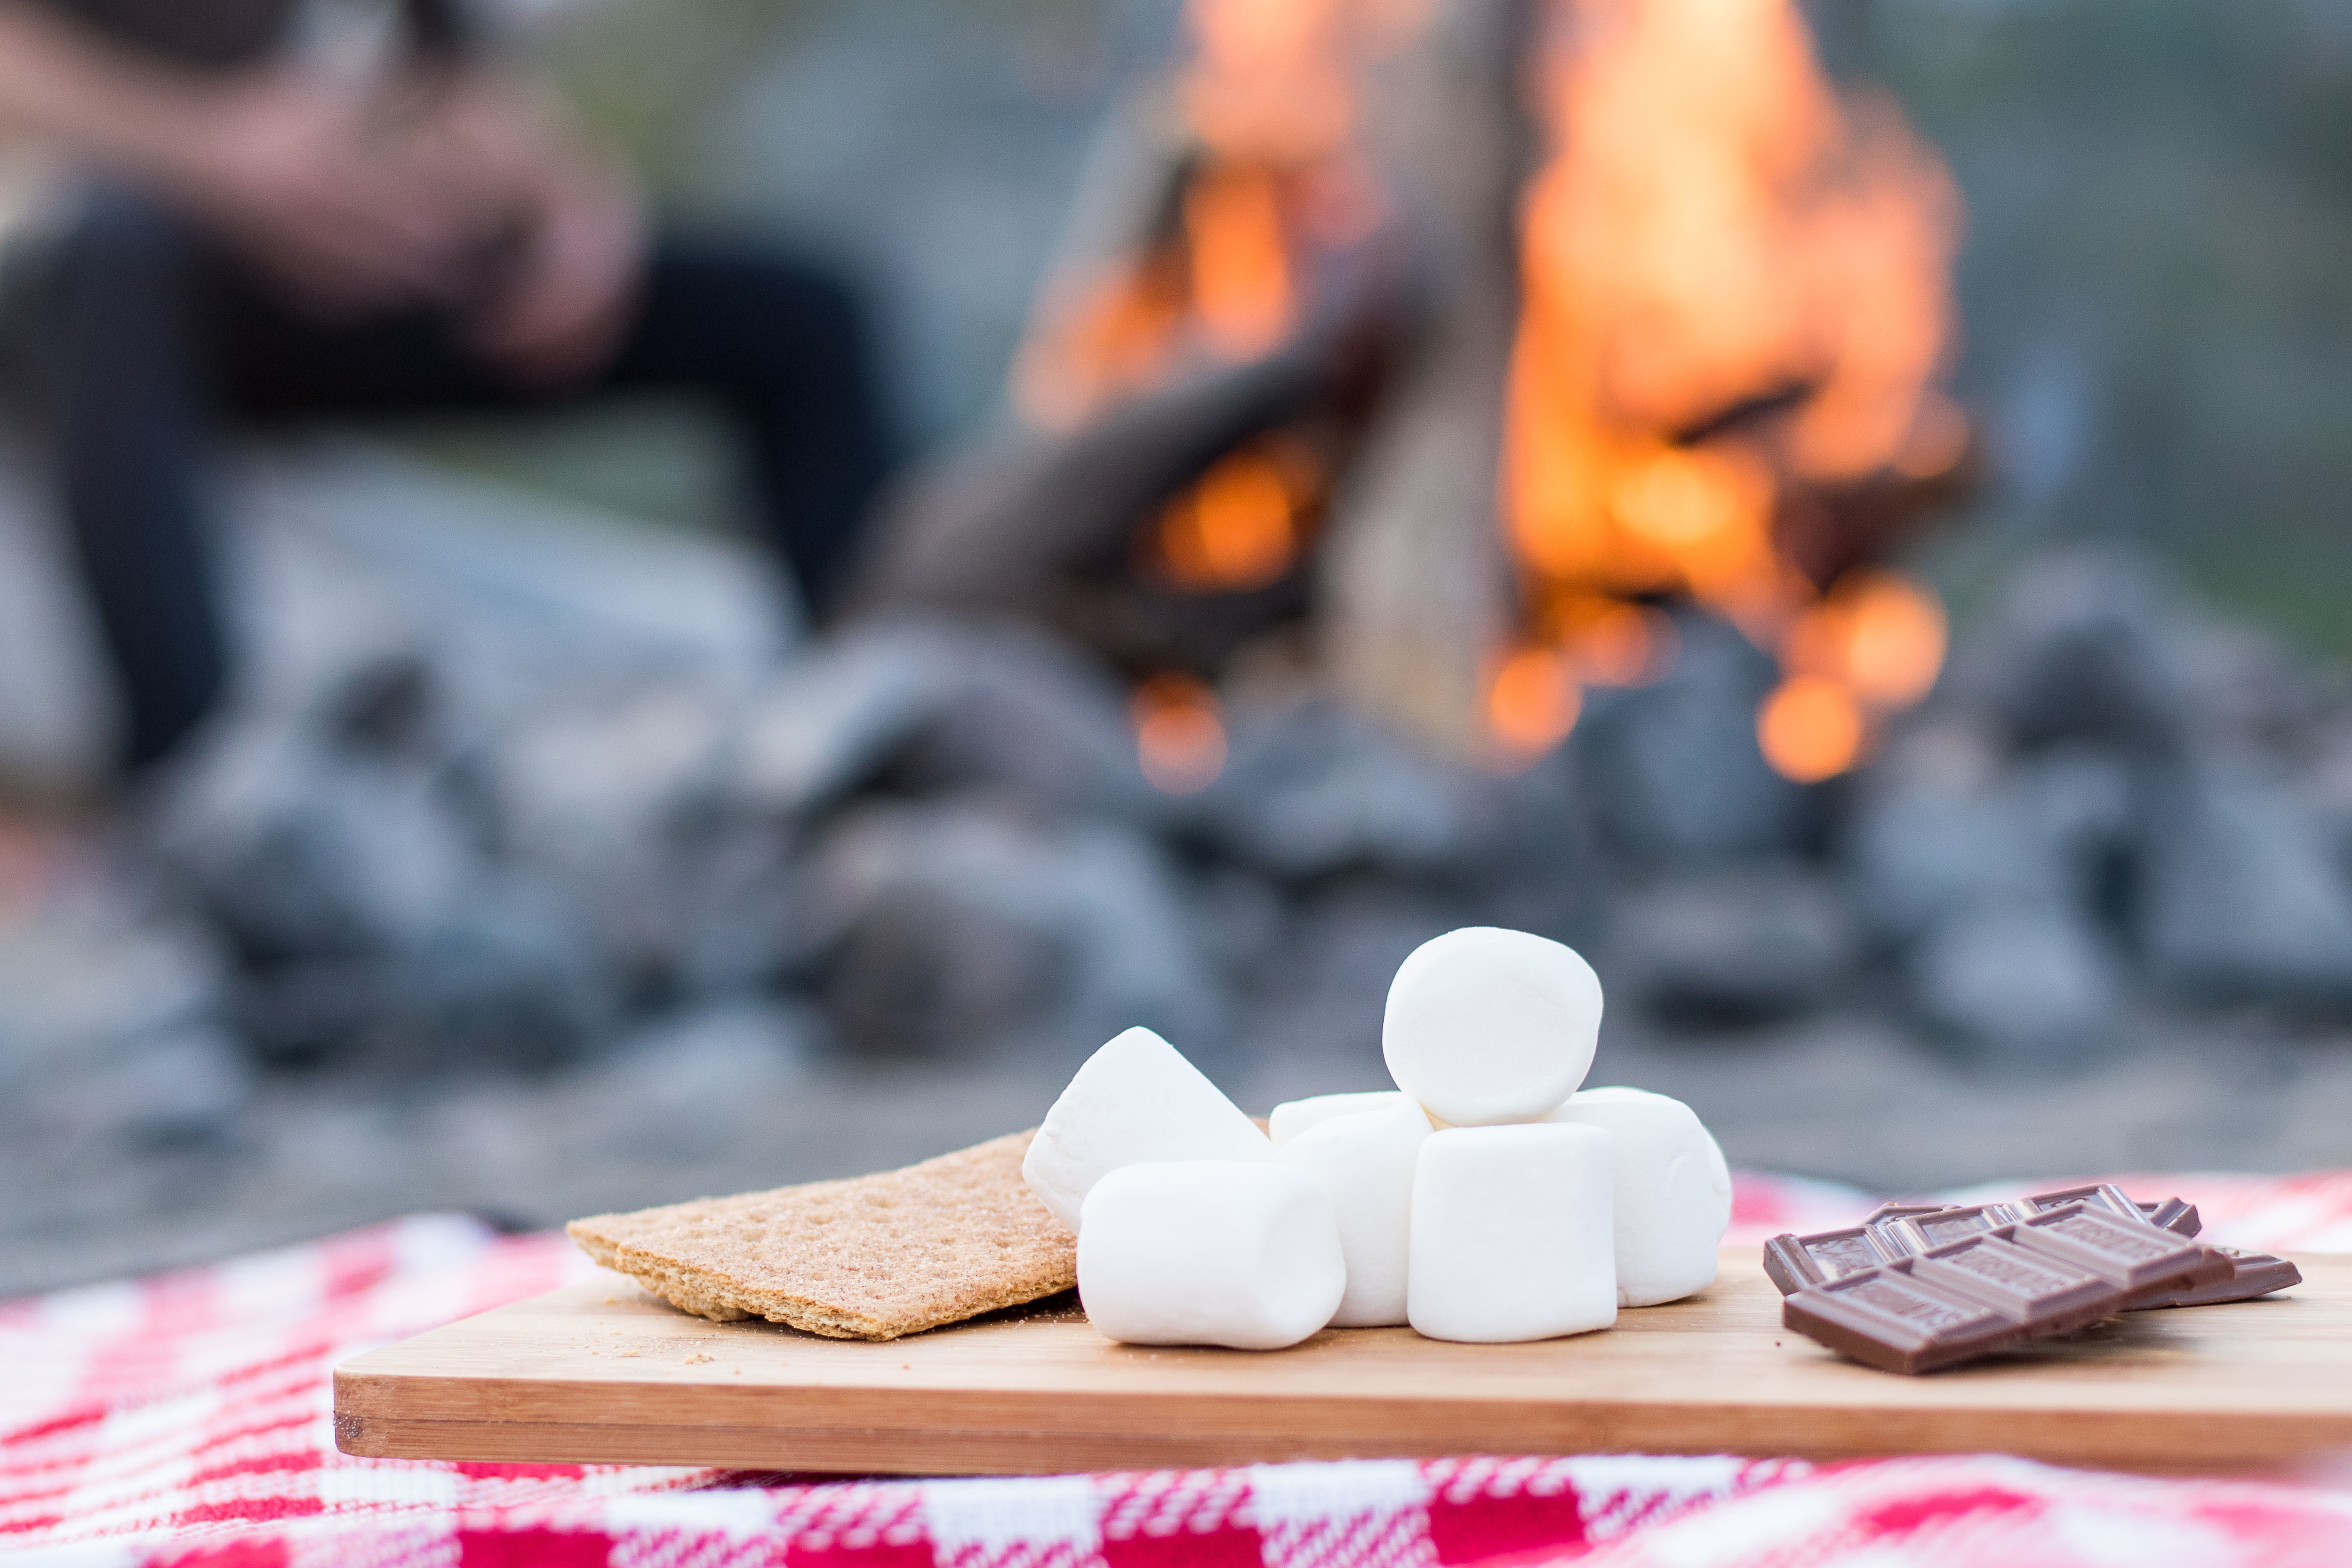 s'mores while camping for date night